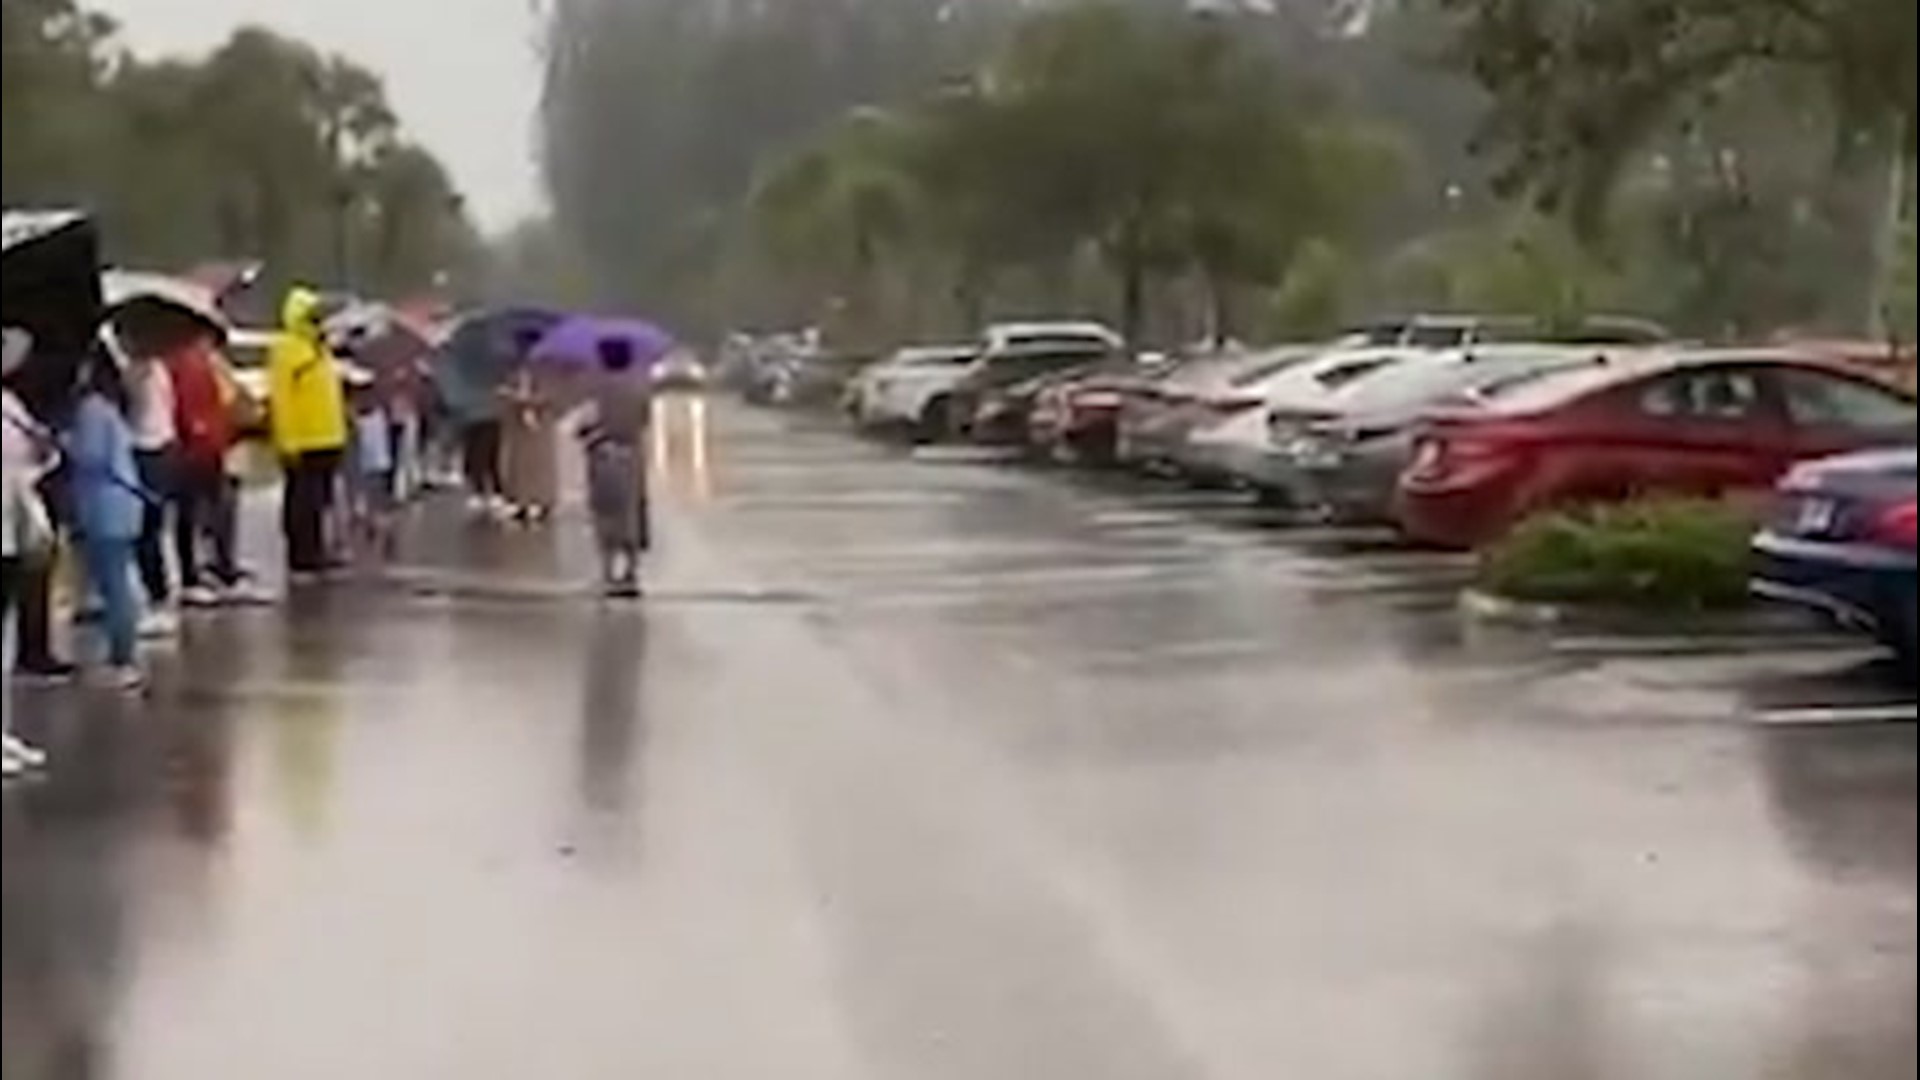 Early voting began in Delray Beach, Florida, on Monday, Oct. 19, drawing long lines of voters despite the pouring rain.